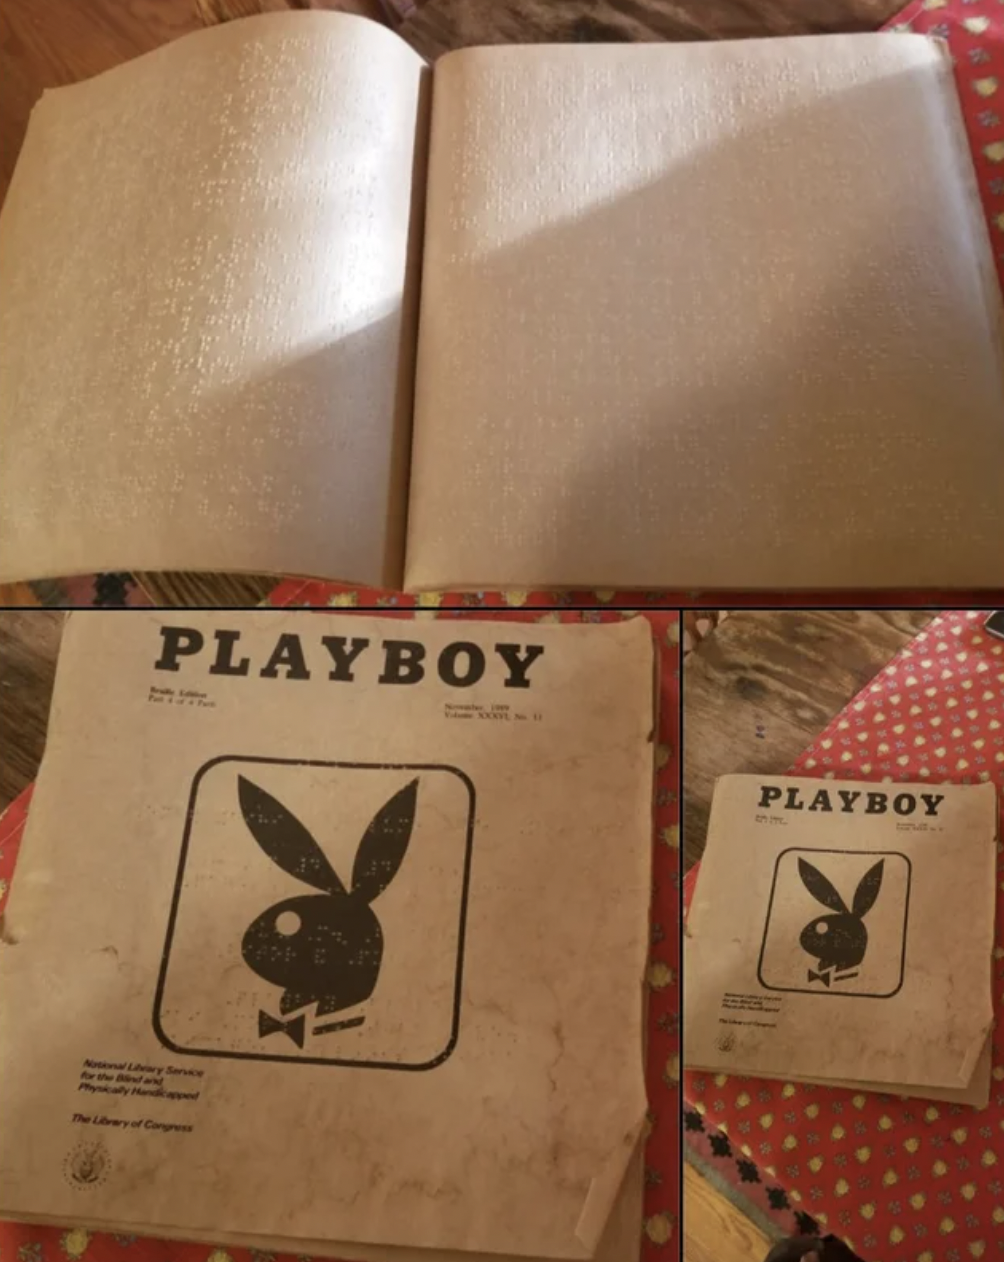 Cool Pictures - play boy - Playboy Playboy